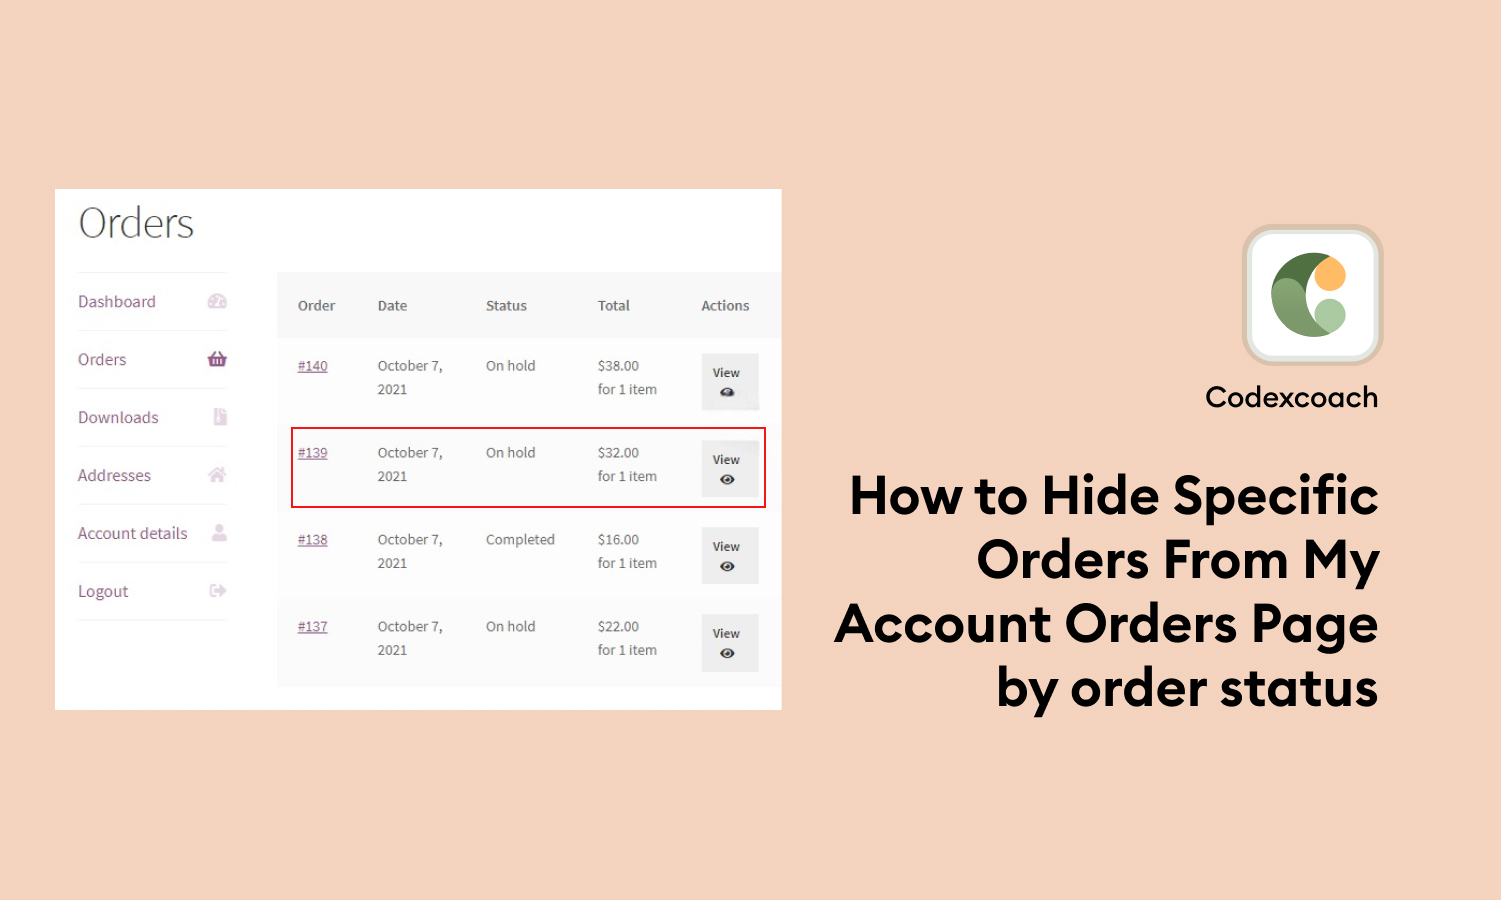 How to Hide Specific Orders From My Account Orders Page by order status